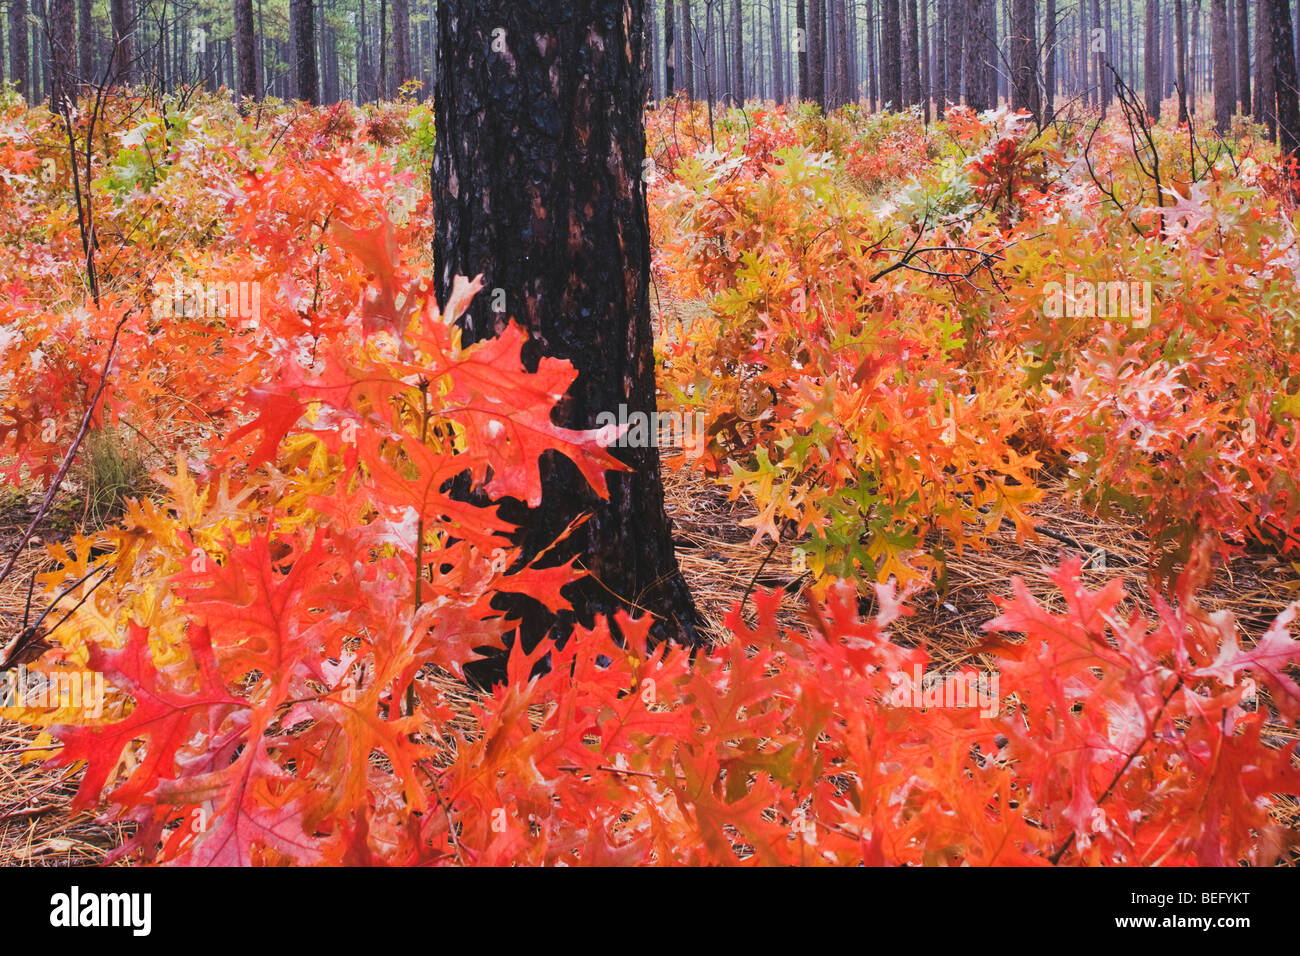 Scarlet Oak (Quercus coccinea) and Longleaf Pine, fall colors, Weymouth Woods Sandhills, Southern Pines, North Carolina, USA Stock Photo